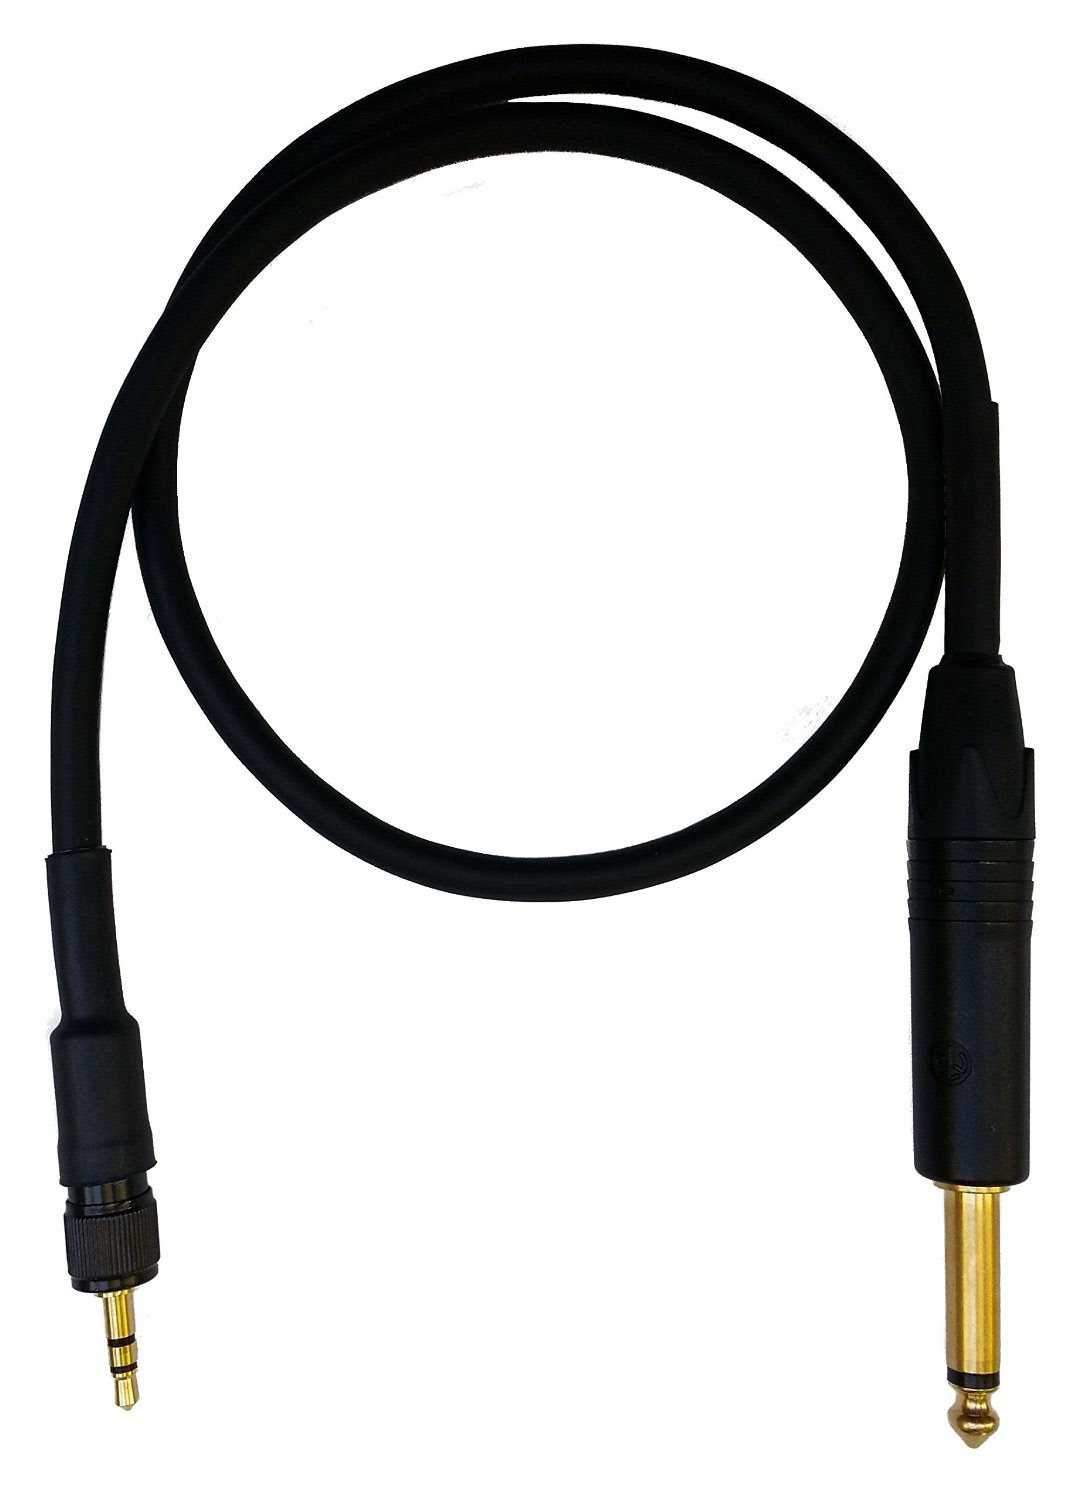 Mogami Beltpack Instrument Cable for Sennheiser Wireless Systems 24ft - ProSound and Stage Lighting